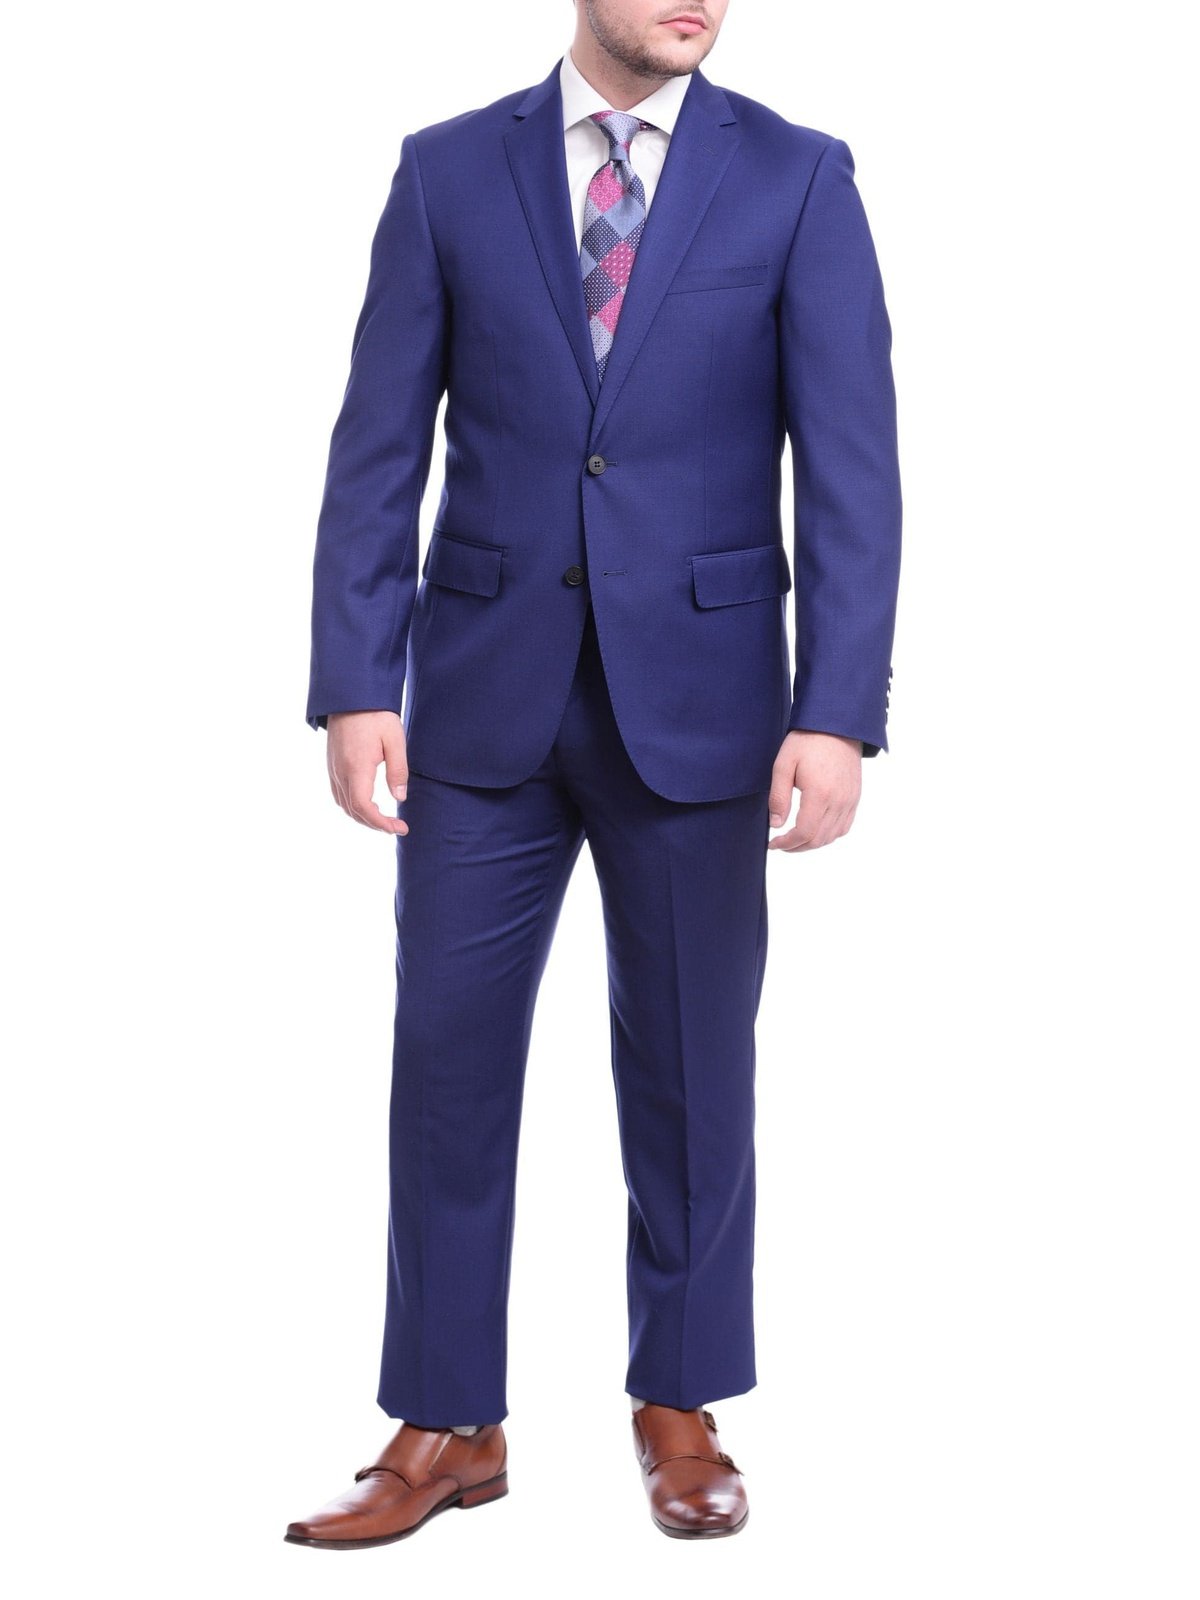 London Fog TWO PIECE SUITS Private Label Slim Fit Solid Royal Blue Two Button Wool Suit With Pick Stitching